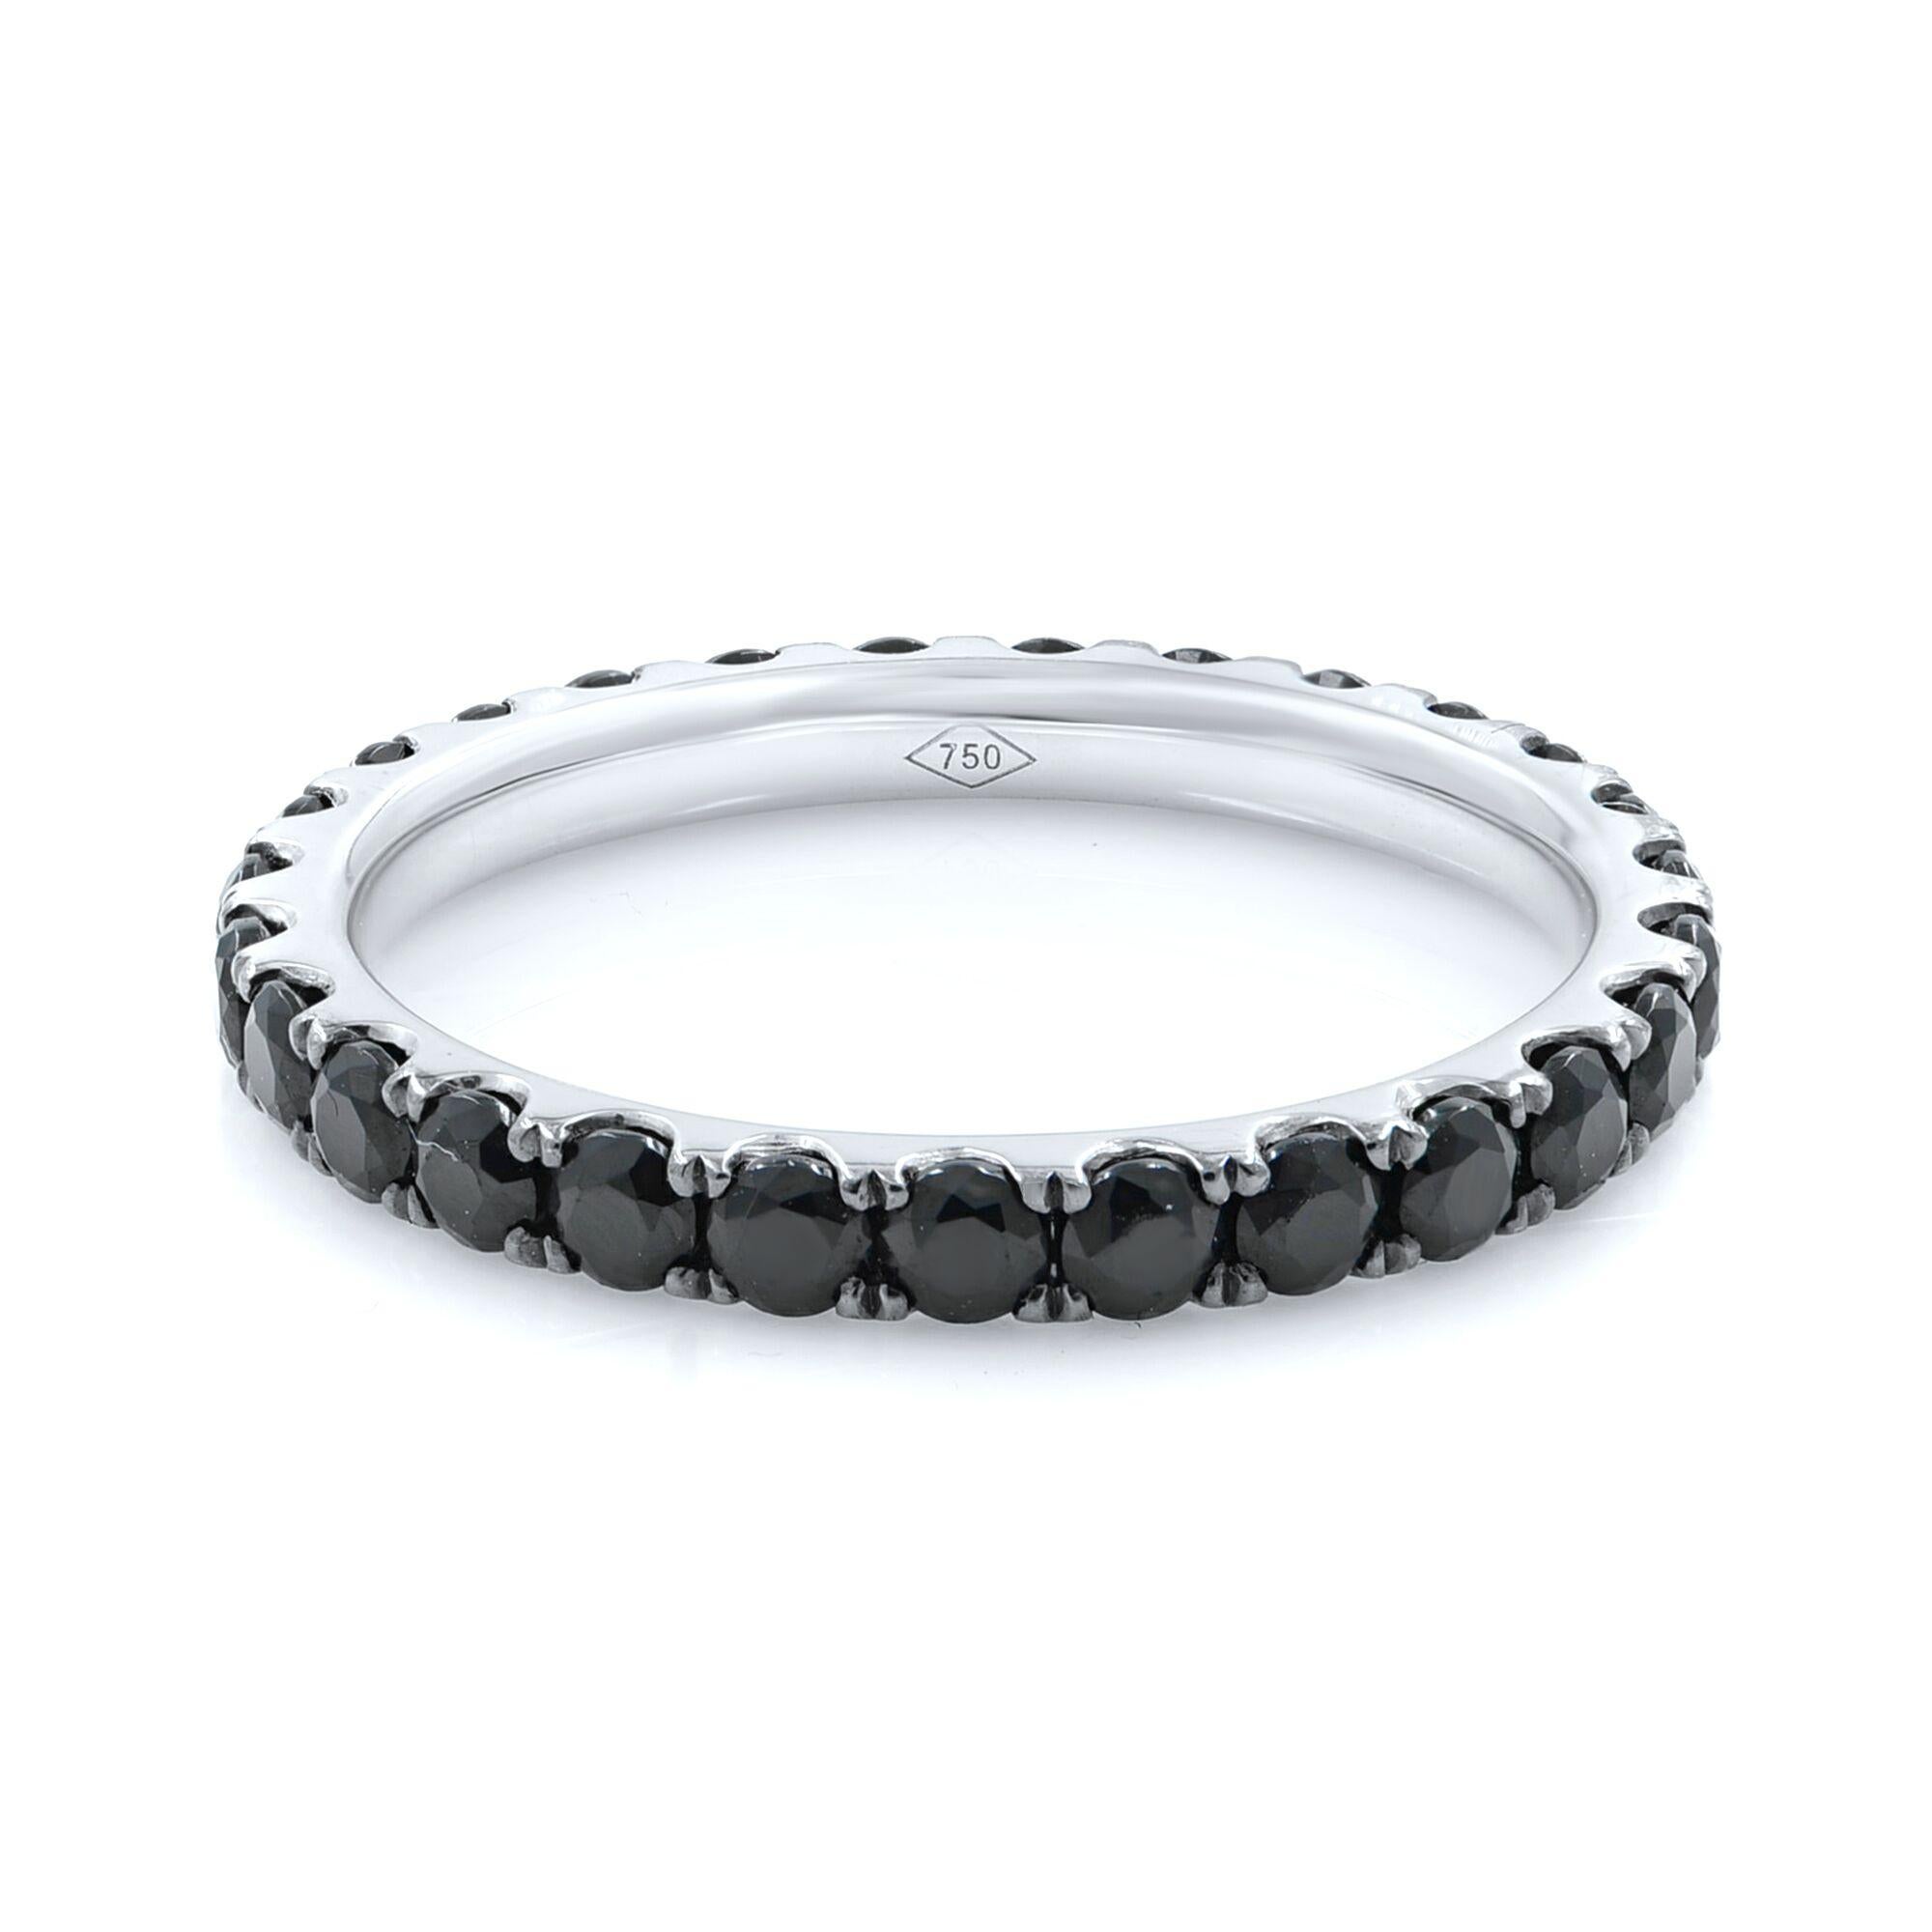 Brand New Dainty black diamond pave set eternity ring crafted in 18k white gold set with 1.37cts of natural black diamonds. 
Size: 5.75
Weight: 1.5 grams
